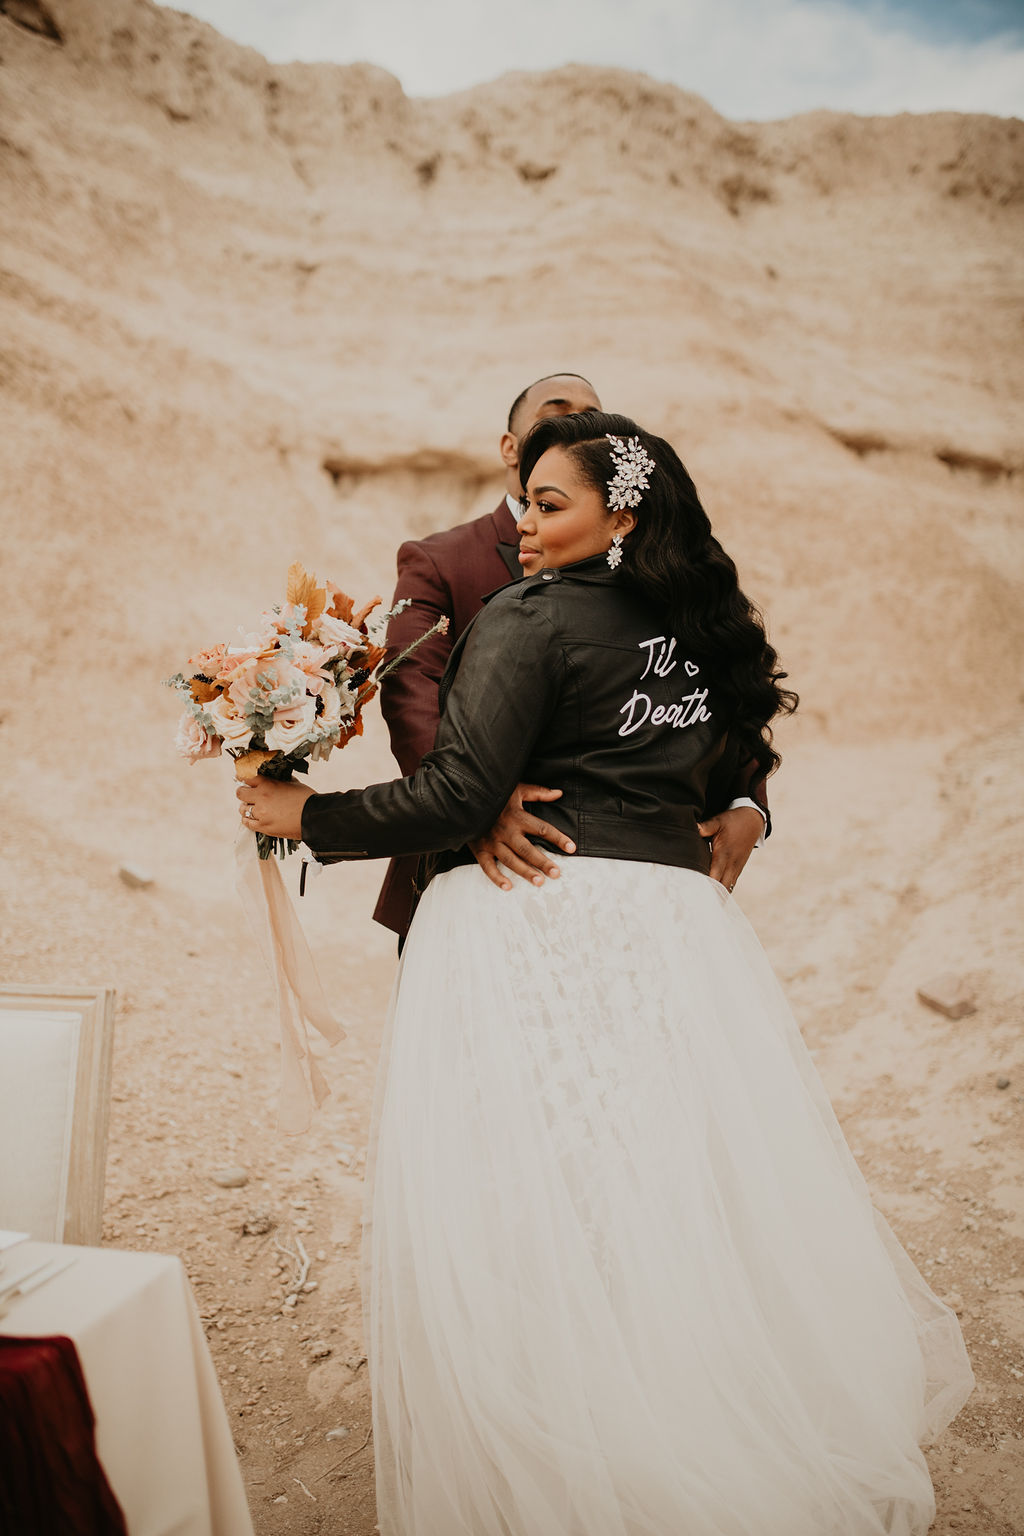 Fossil Beds Sunset Elopement. The beautiful bride sporting a custom leather wedding jacket saying "till death" as her and the groom face each other 